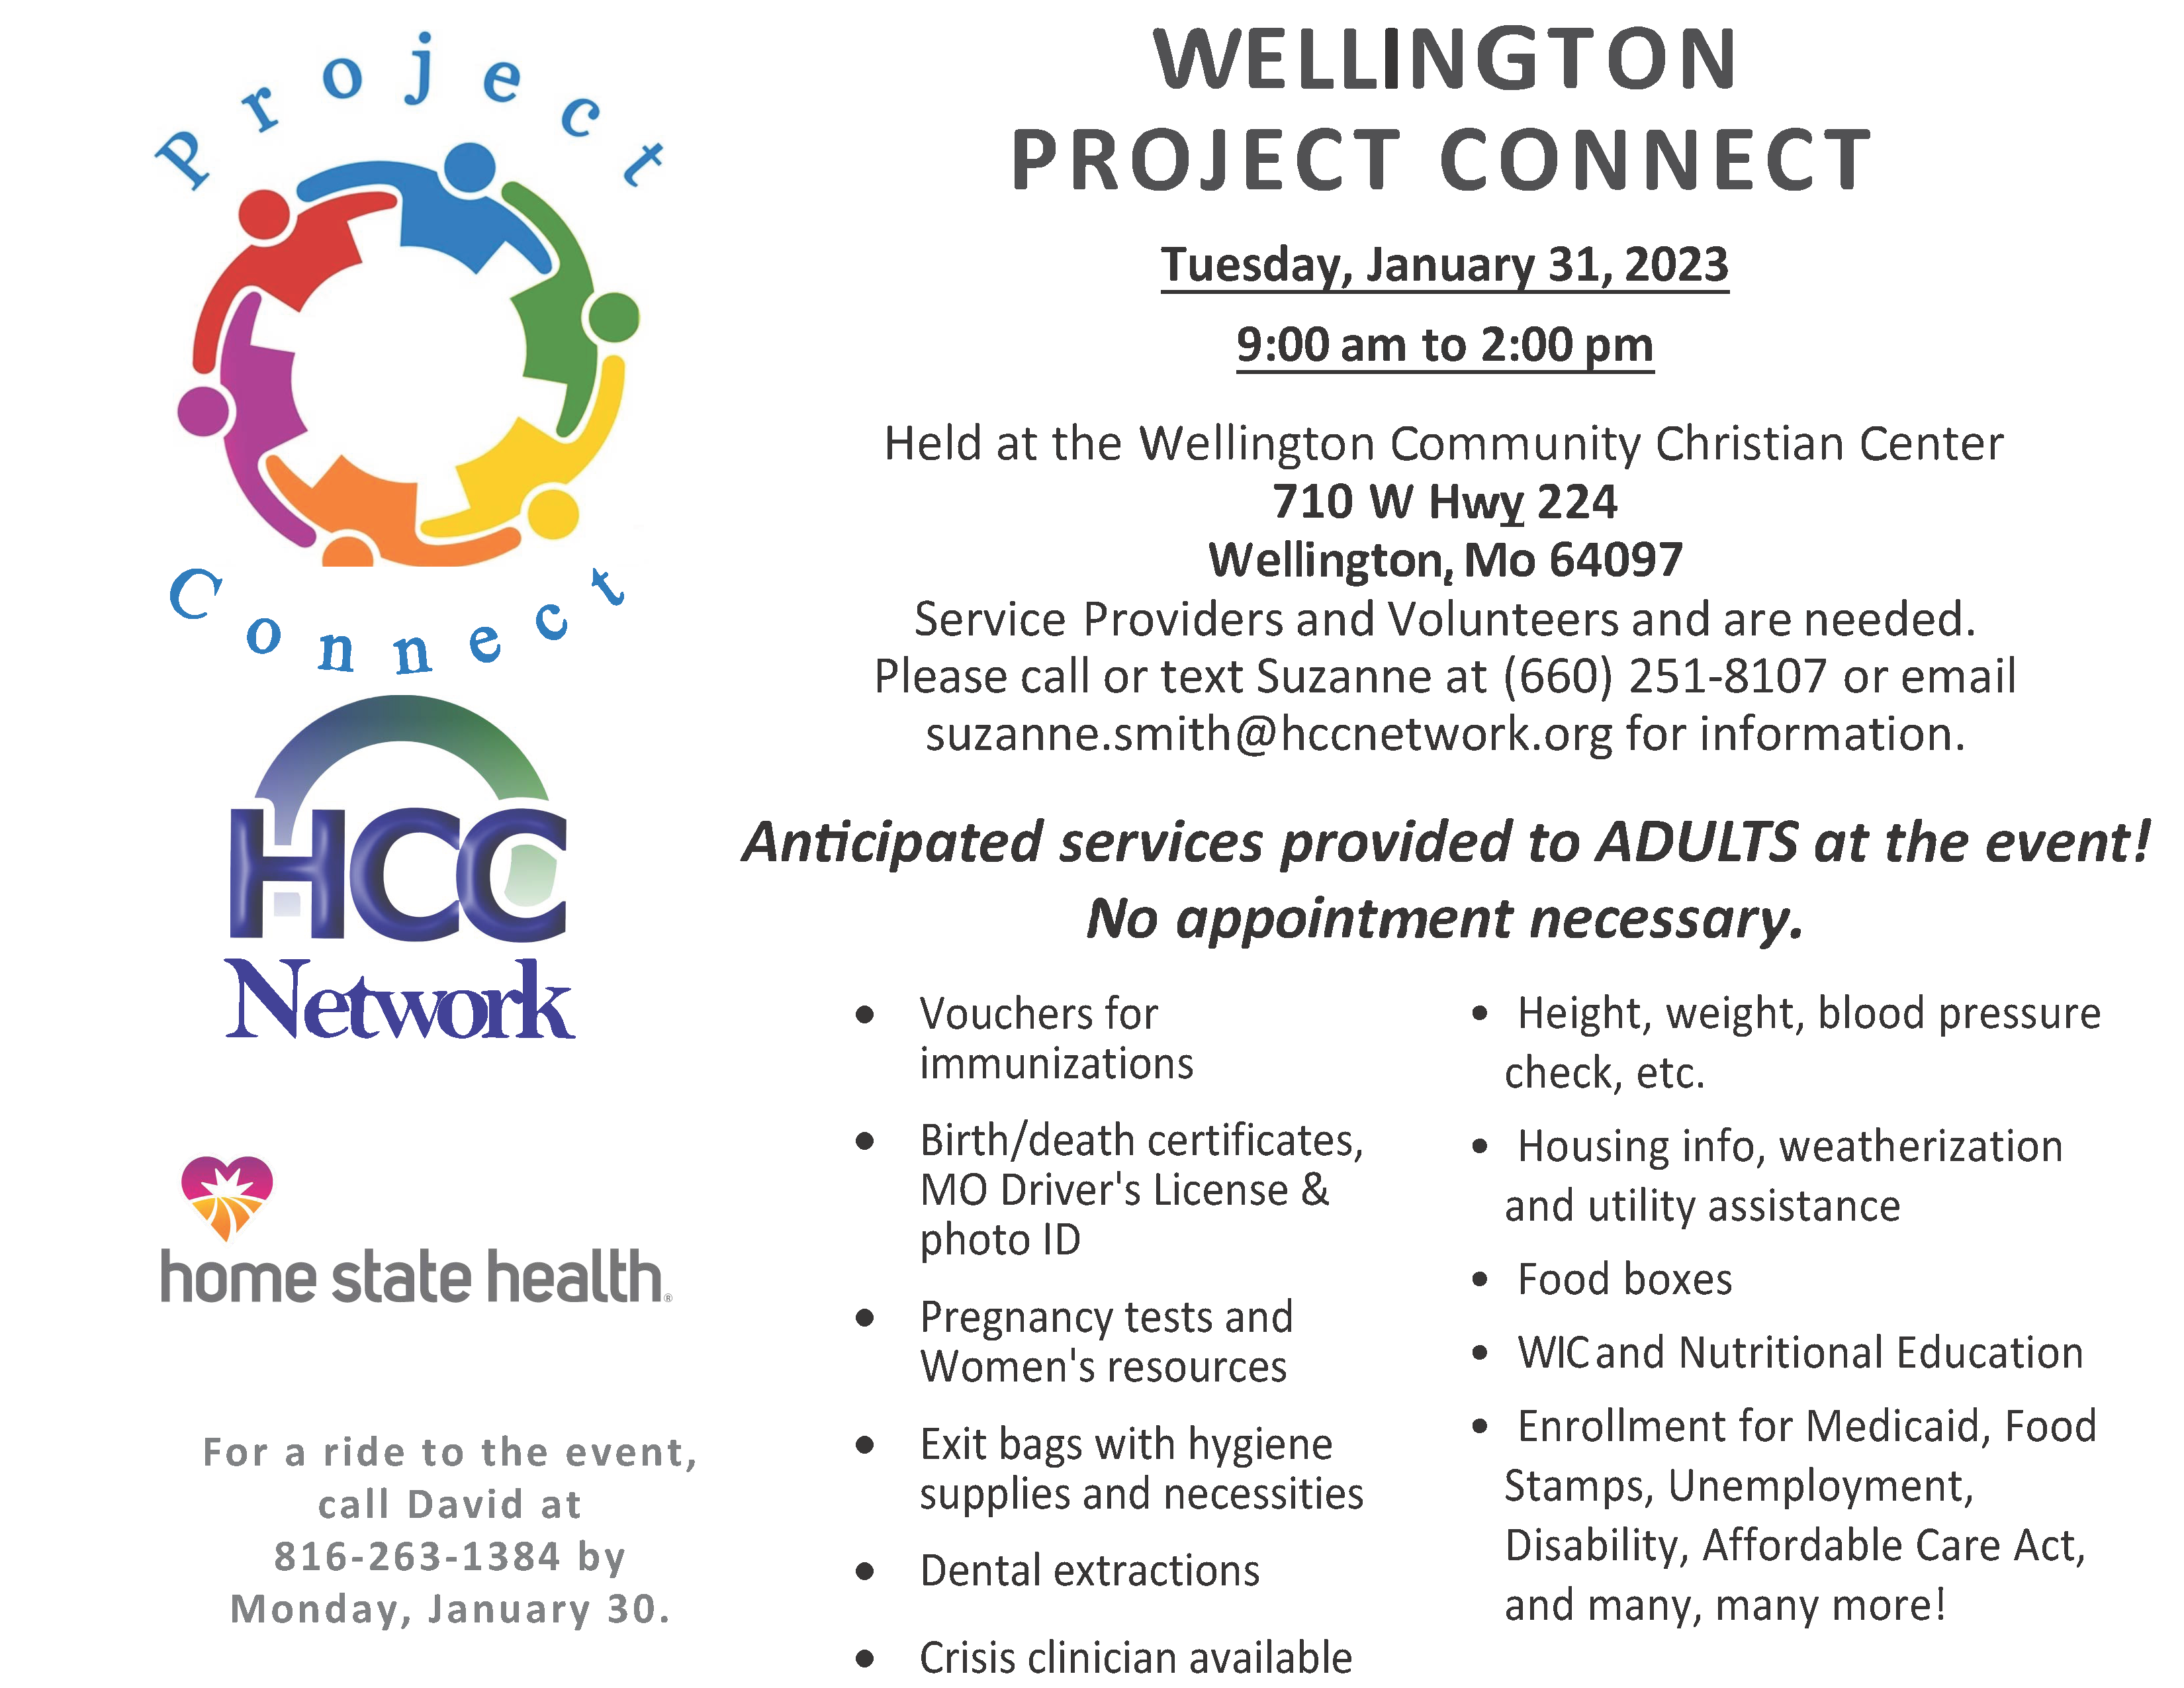 WELLINGTON PROJECT CONNECT Tuesday, January 31, 2023 9:00 am to 2:00 pm Held at the Wellington Community Christian Center 710 W Hwy 224 Wellington, Mo 64097 Service Providers and Volunteers and are needed. Please call or text Suzanne at (660) 251-8107 or email suzanne.smith@hccnetwork.org for information. Anticipated services provided to ADULTS at the event! No appointment necessary. • Height, weight, blood pressure check, etc. • Housing info, weatherization and utility assistance • Food boxes • WIC and Nutritional Education • Enrollment for Medicaid, Food Stamps, Unemployment, Disability, Affordable Care Act, and many, many more! Network • Vouchers for immunizations • Birth/death certificates, MO Driver's License & photo ID • Pregnancy tests and Women's resources • Exit bags with hygiene supplies and necessities • Dental extractions • Crisis clinician available For a ride to the event, call David at 816-263-1384 by Monday, January 30.